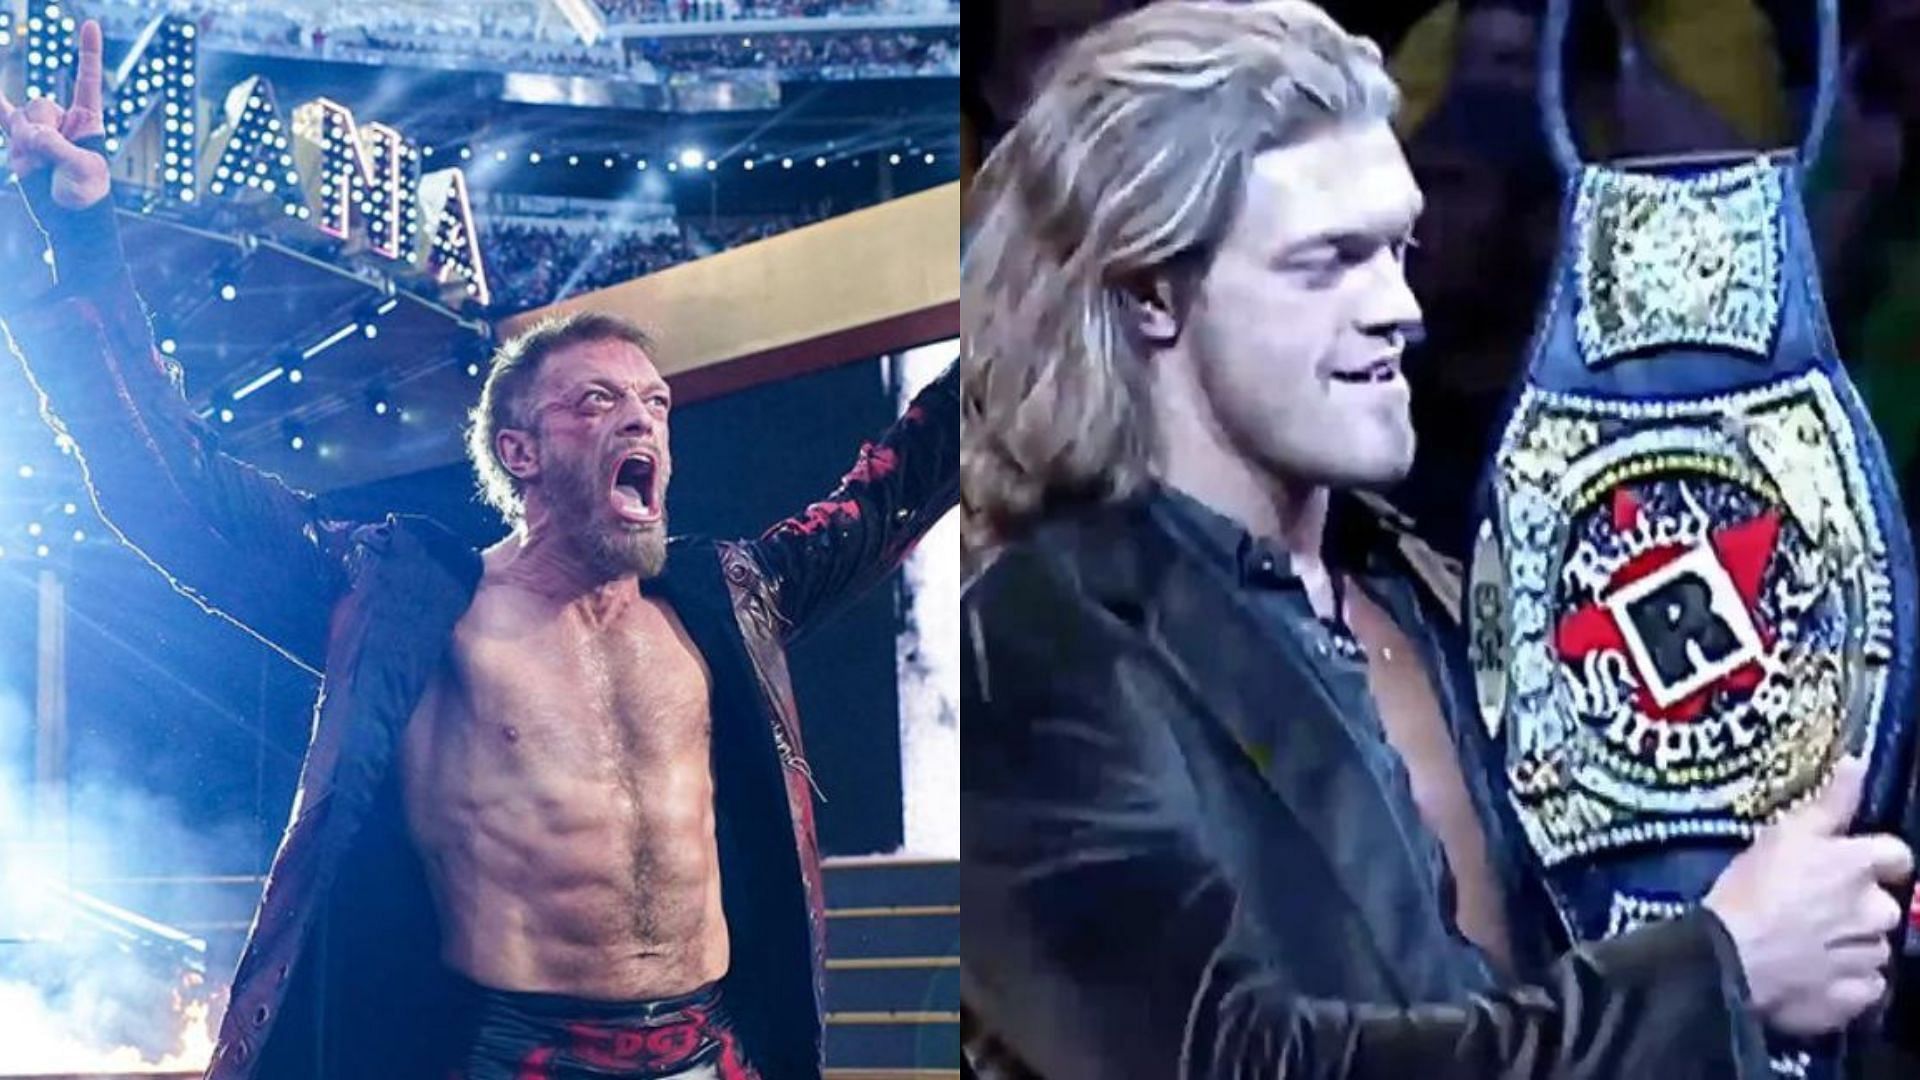 Will Edge remain in WWE or will he transition to a different company?